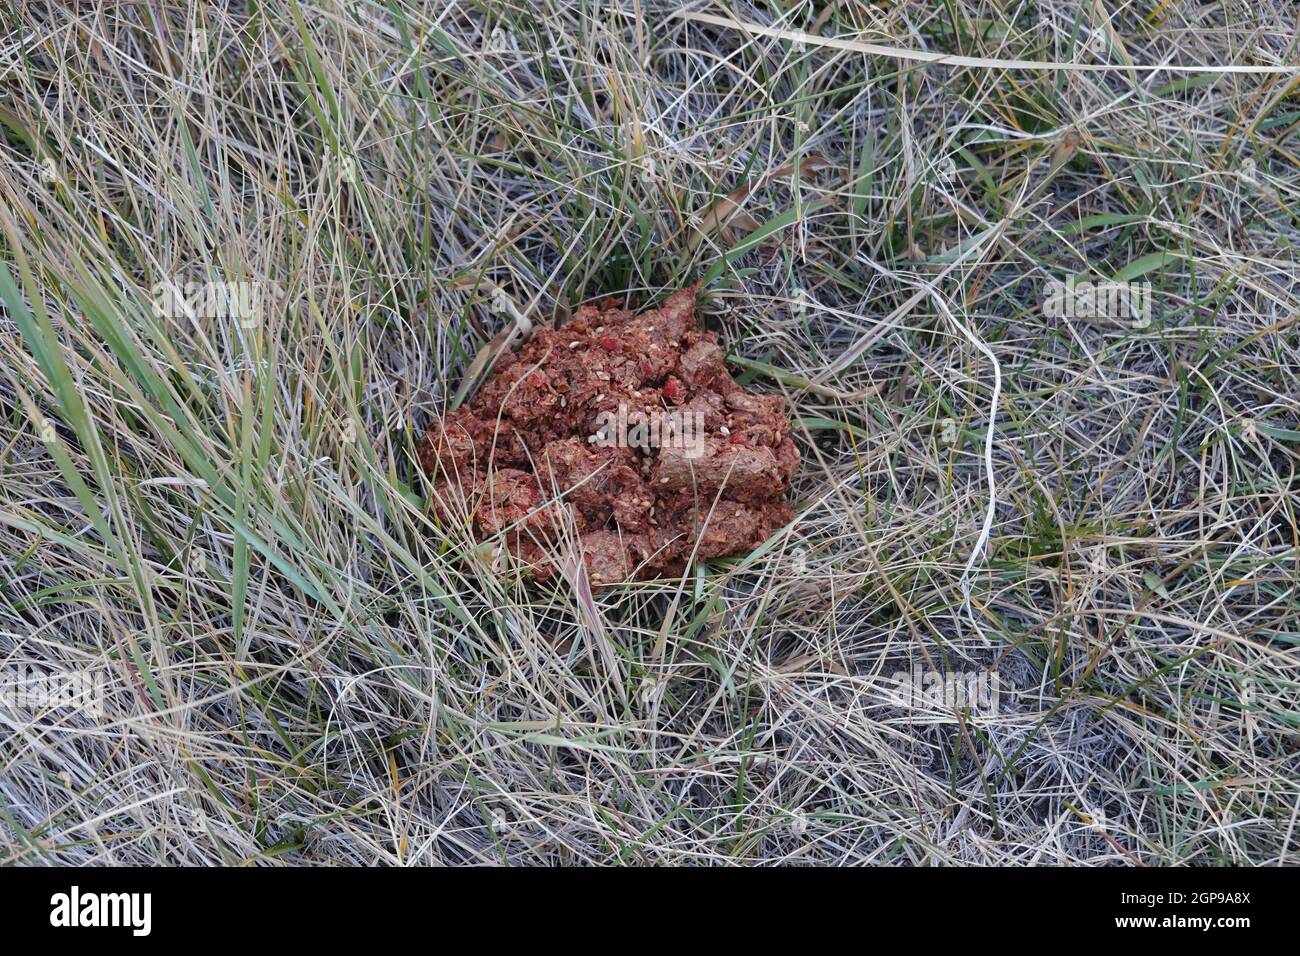 Wild Bear scat full of berries in a meadow in the Sierra Nevada mountains California Stock Photo